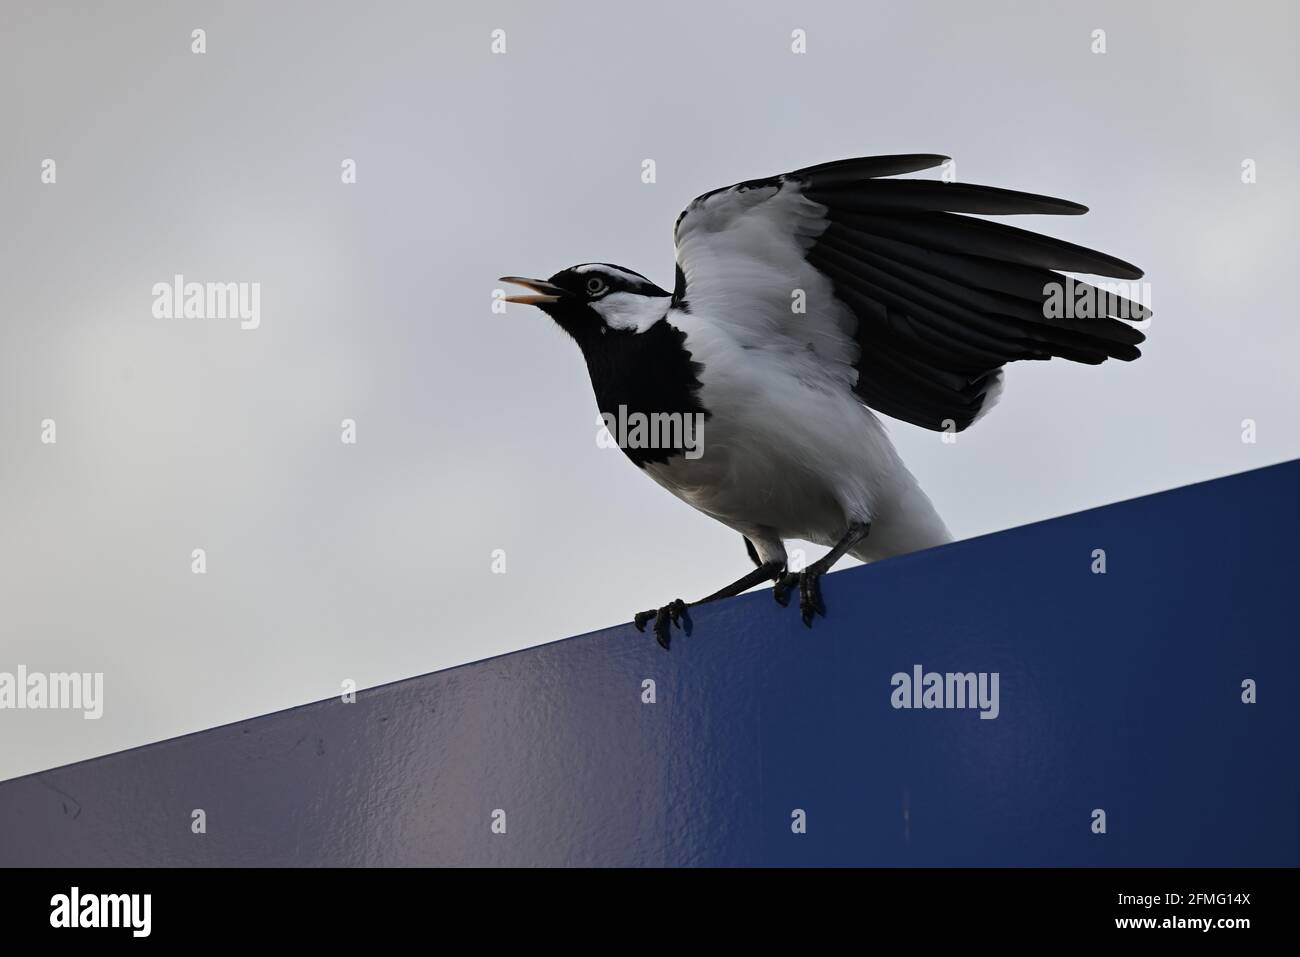 A magpie-lark squawking, with its wings open, while perched atop a blue sign Stock Photo